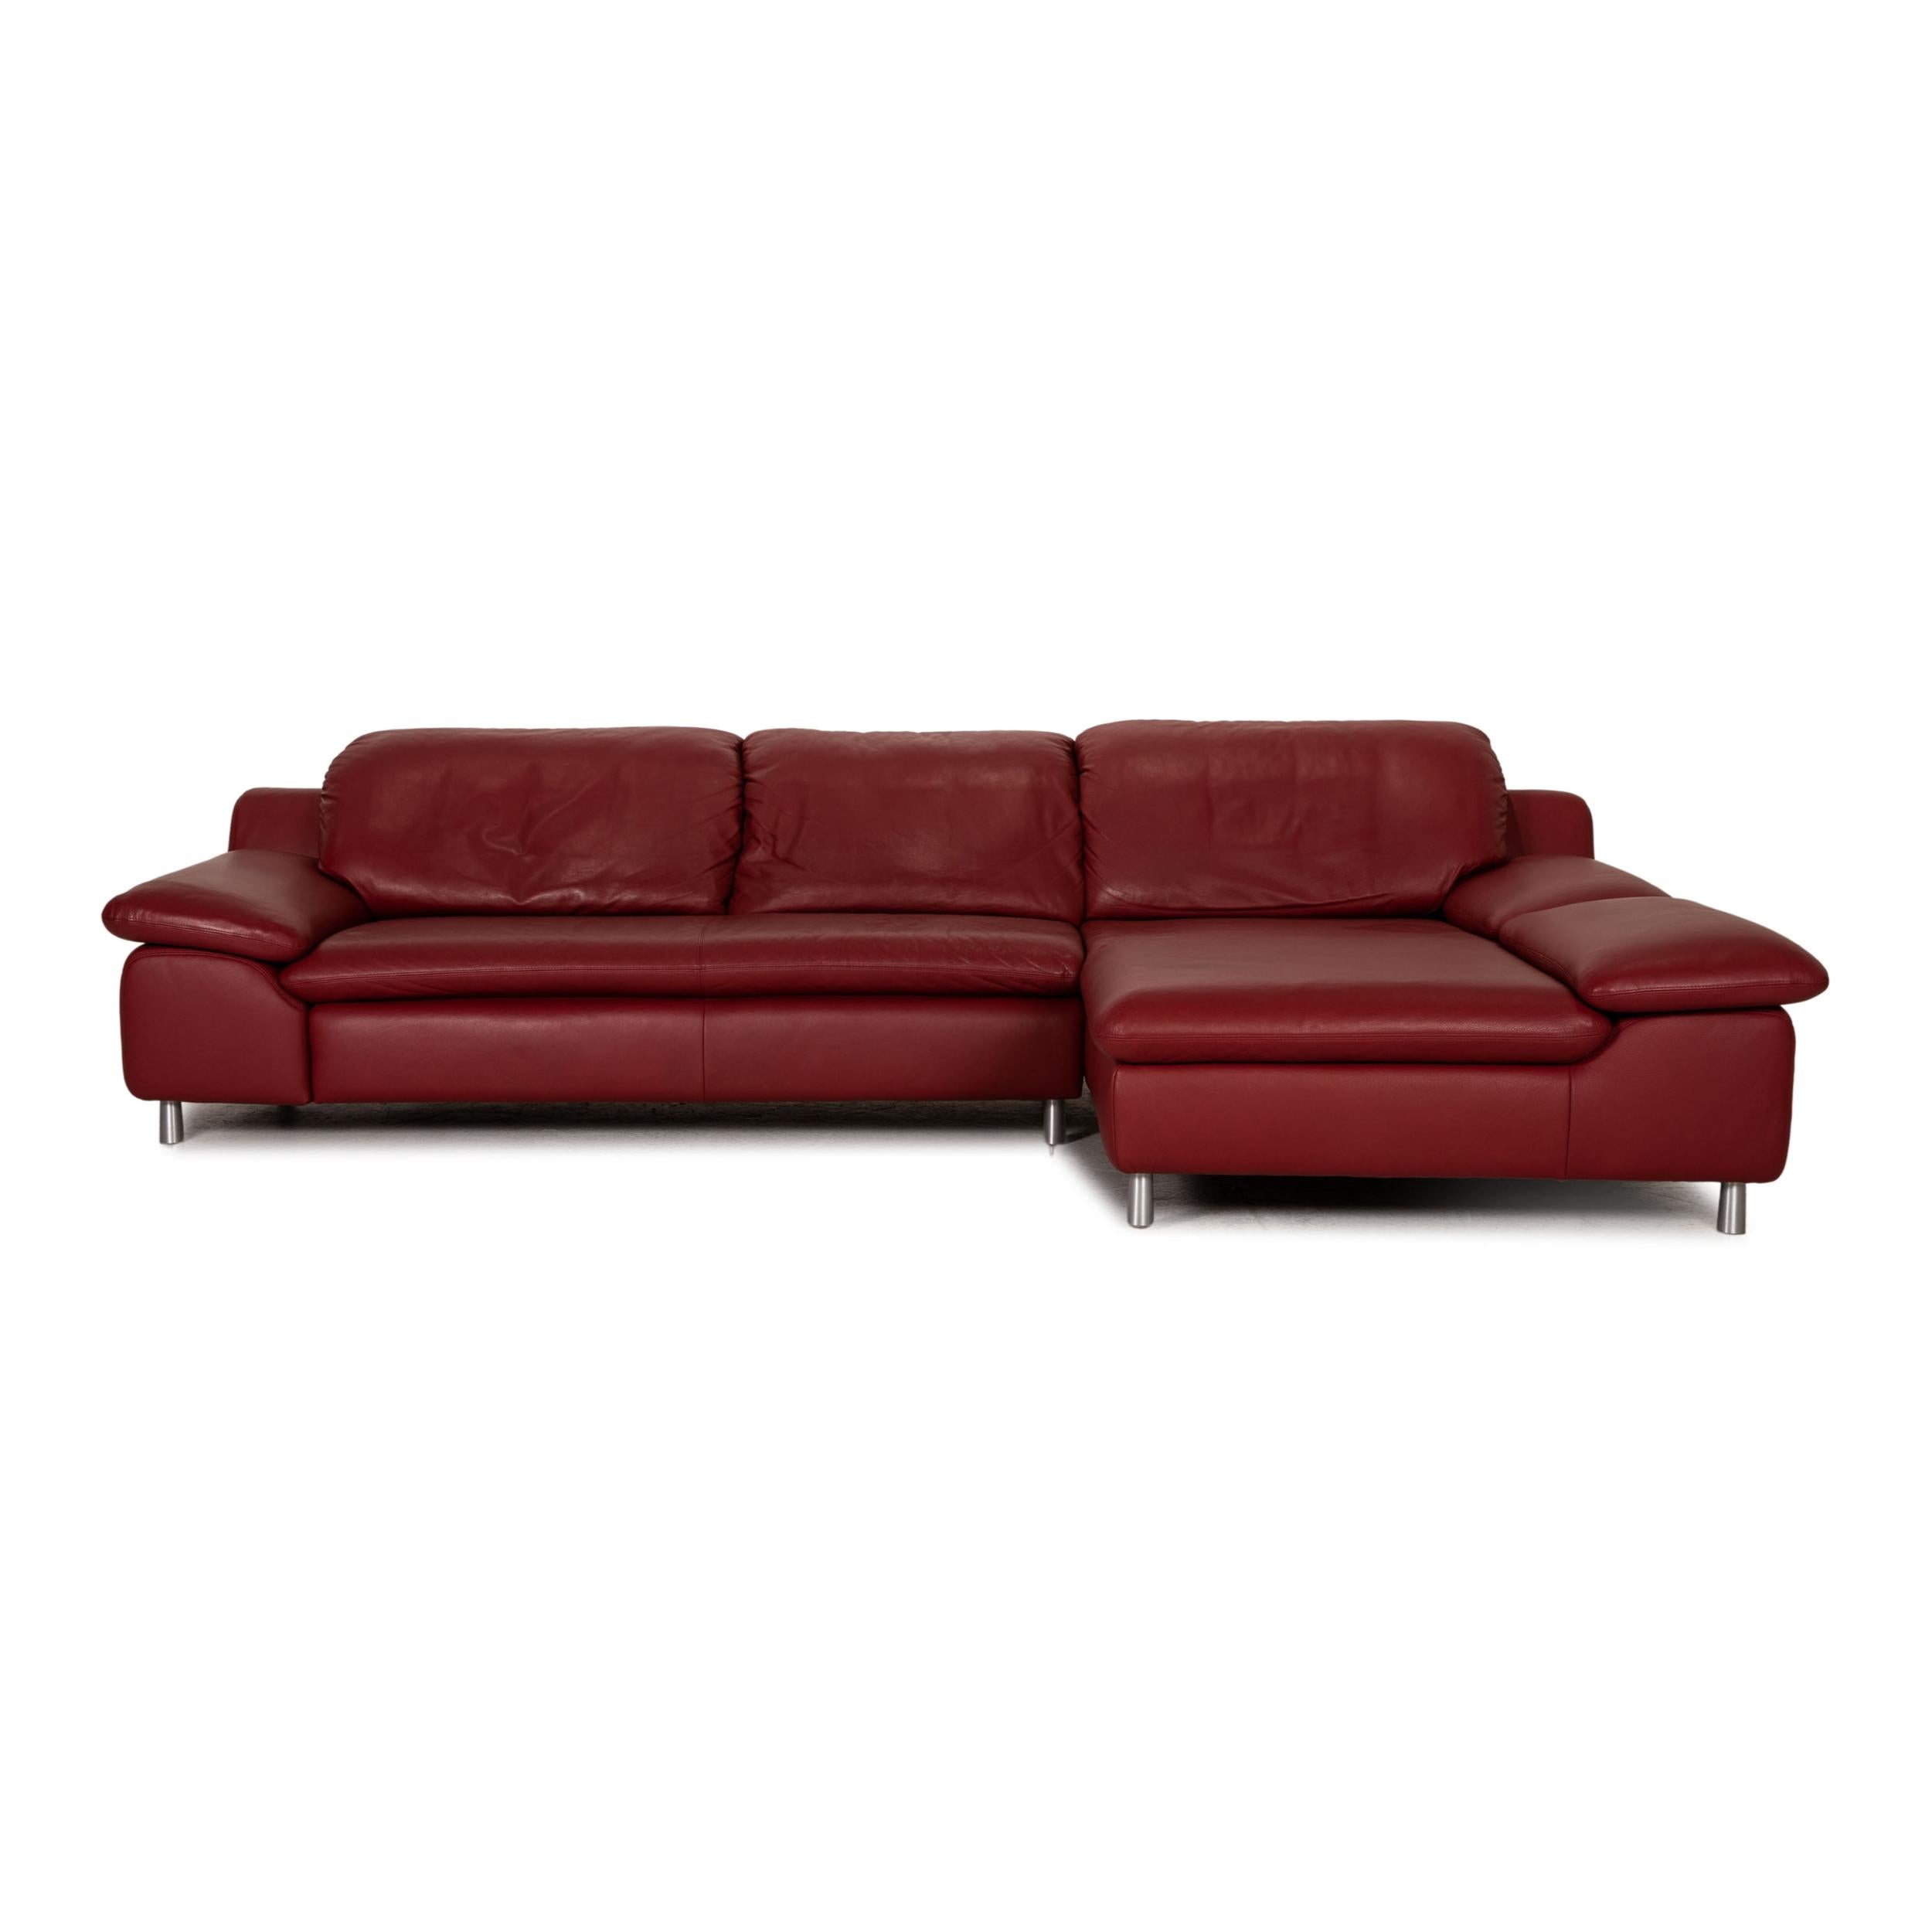 Willi Schillig Amore Leather Sofa Red Corner Sofa Couch Function For Sale 3